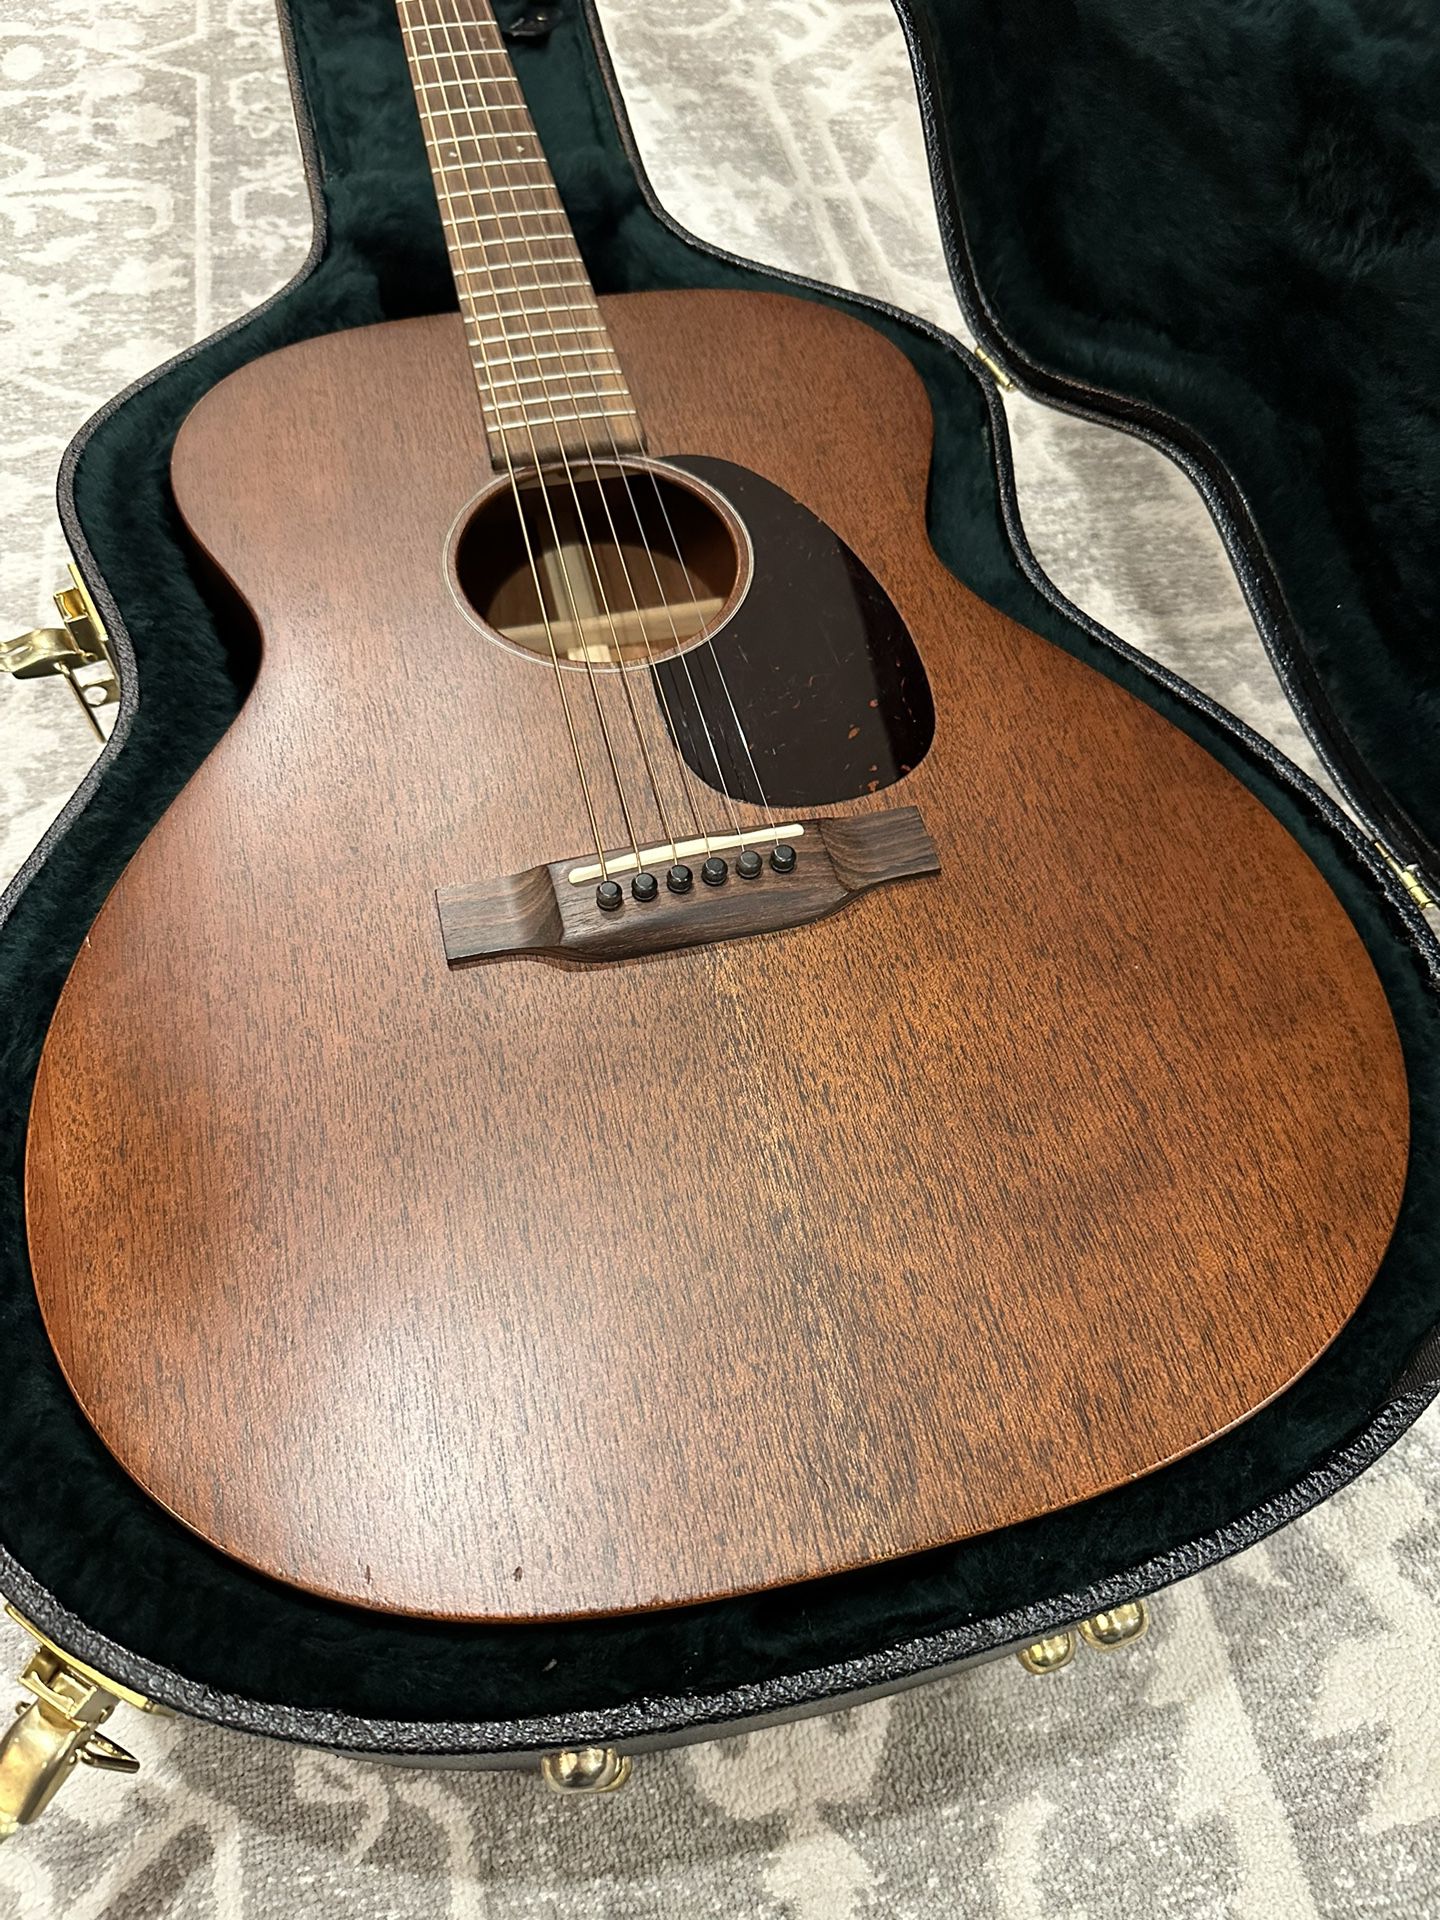 FS/FT 2017 Martin 000-15M Solid Mahogany Acoustic Guitar Made in USA with Original Hardshell Case